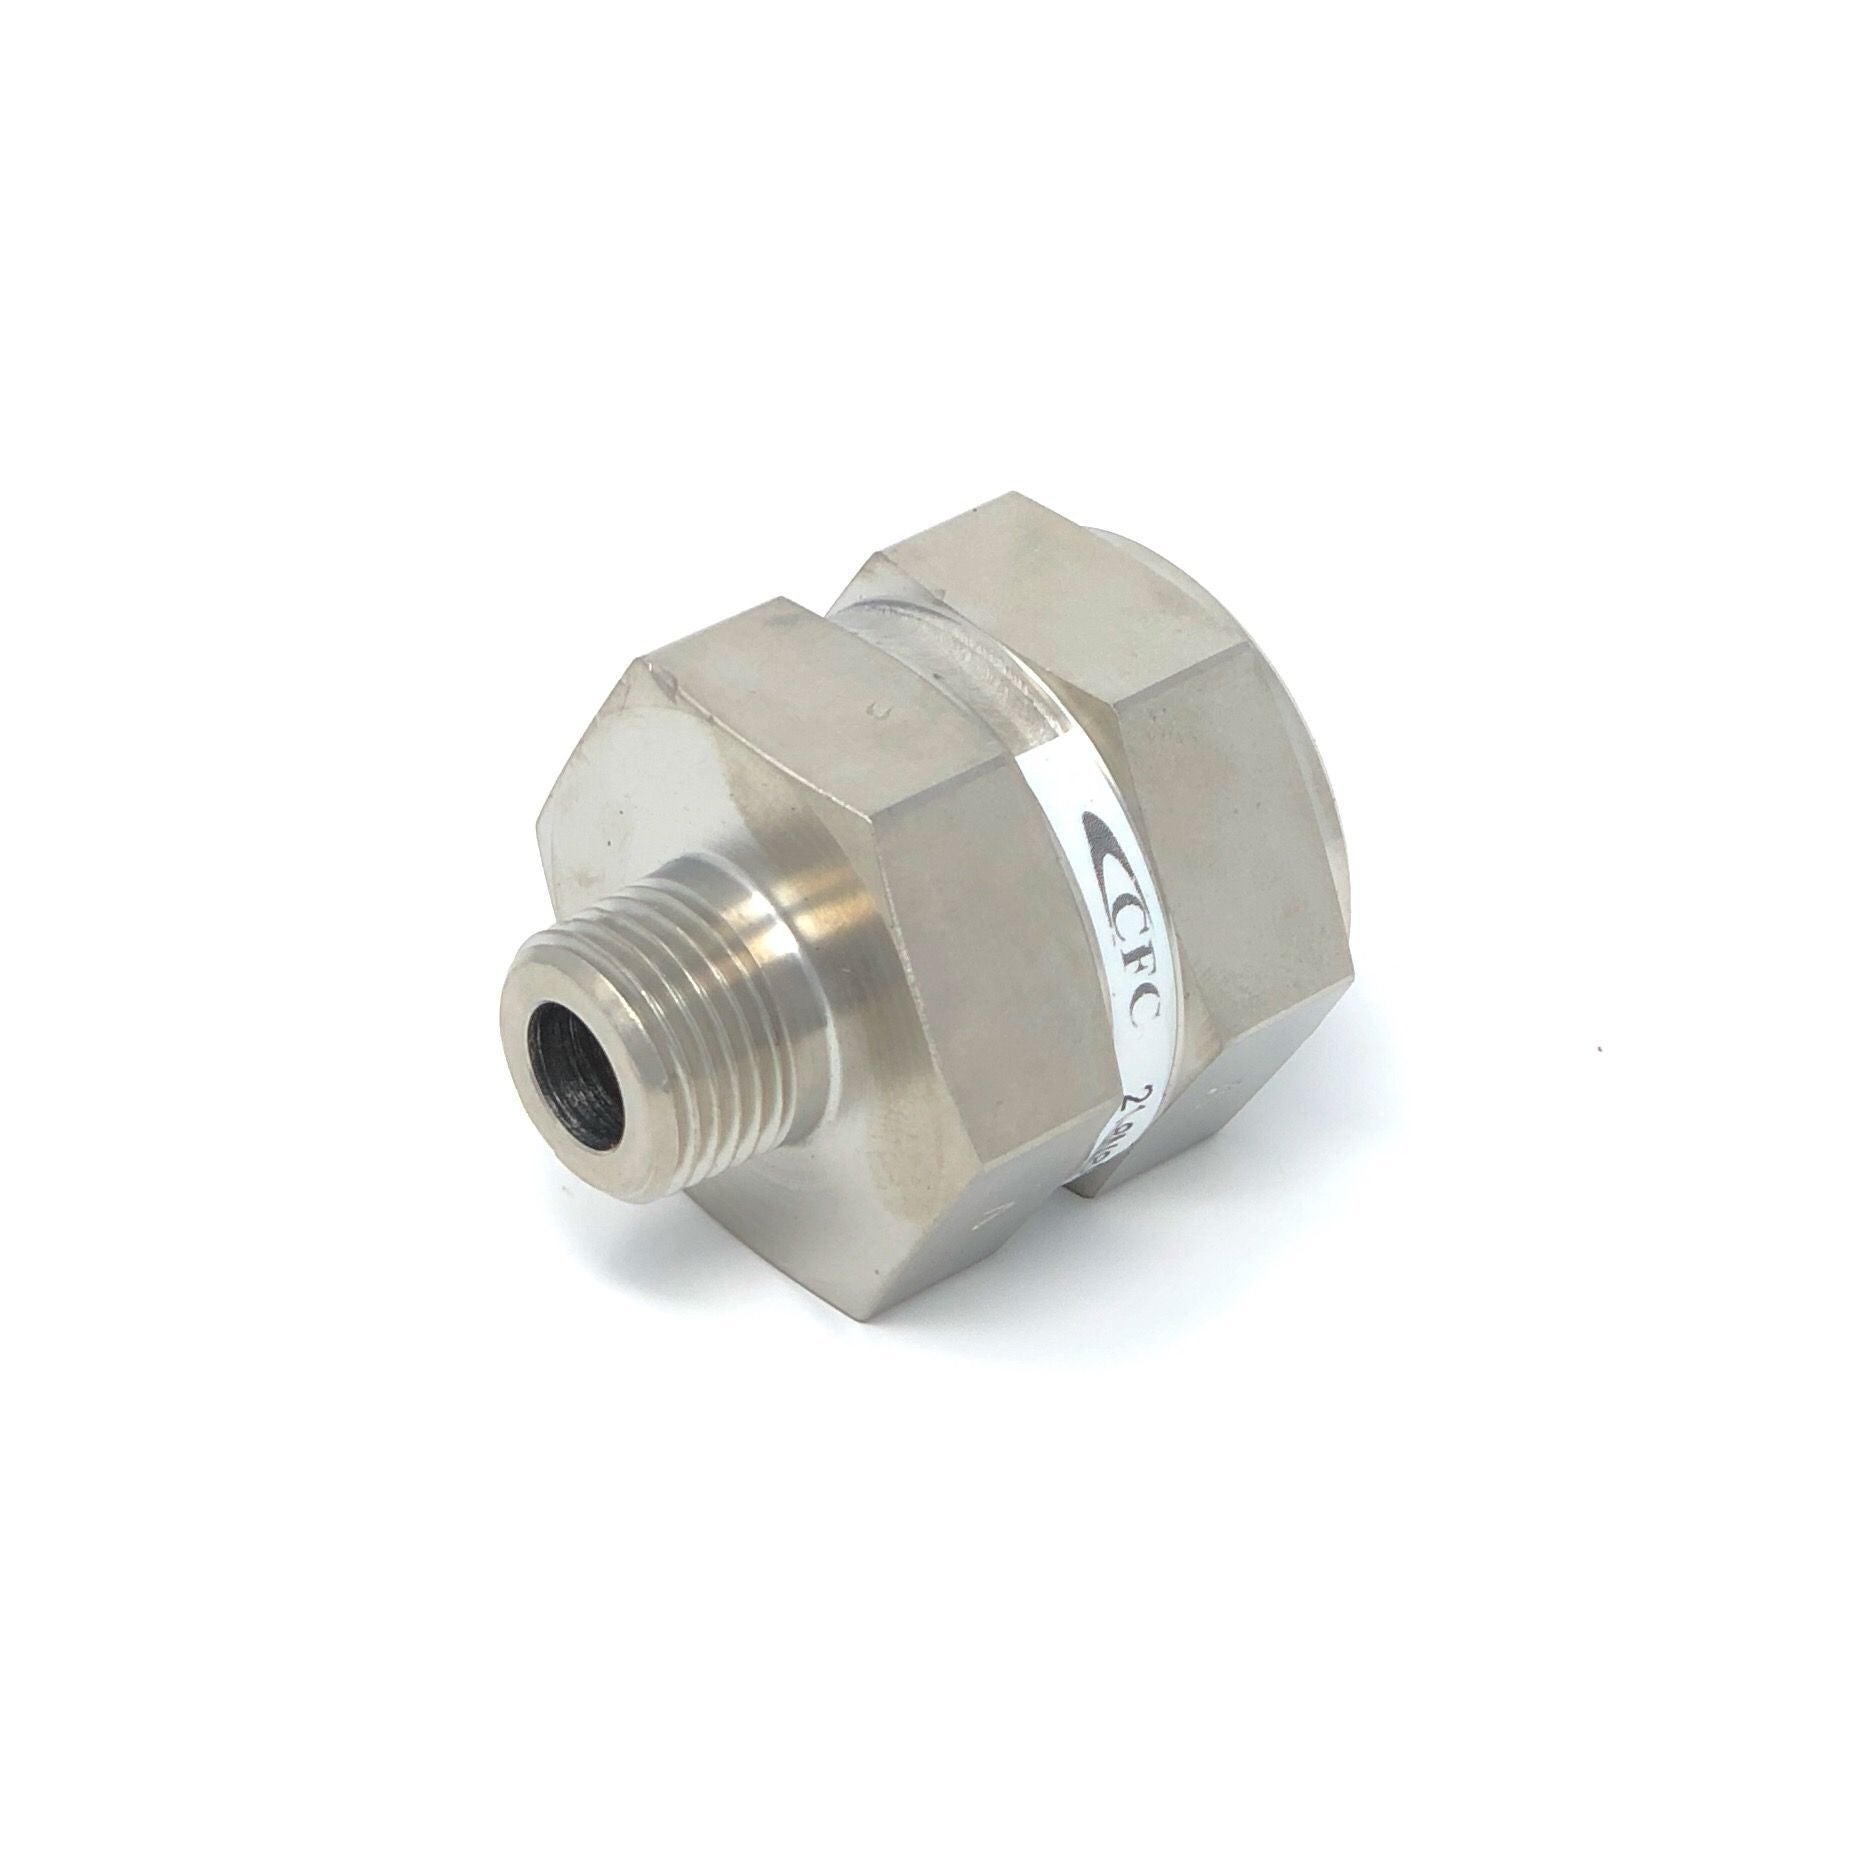 21-4N4N-18S : Chase High Pressure Inline Filter, 6000psi, 1/4" NPT, 18 Micron, No Visual Indicator, No Bypass